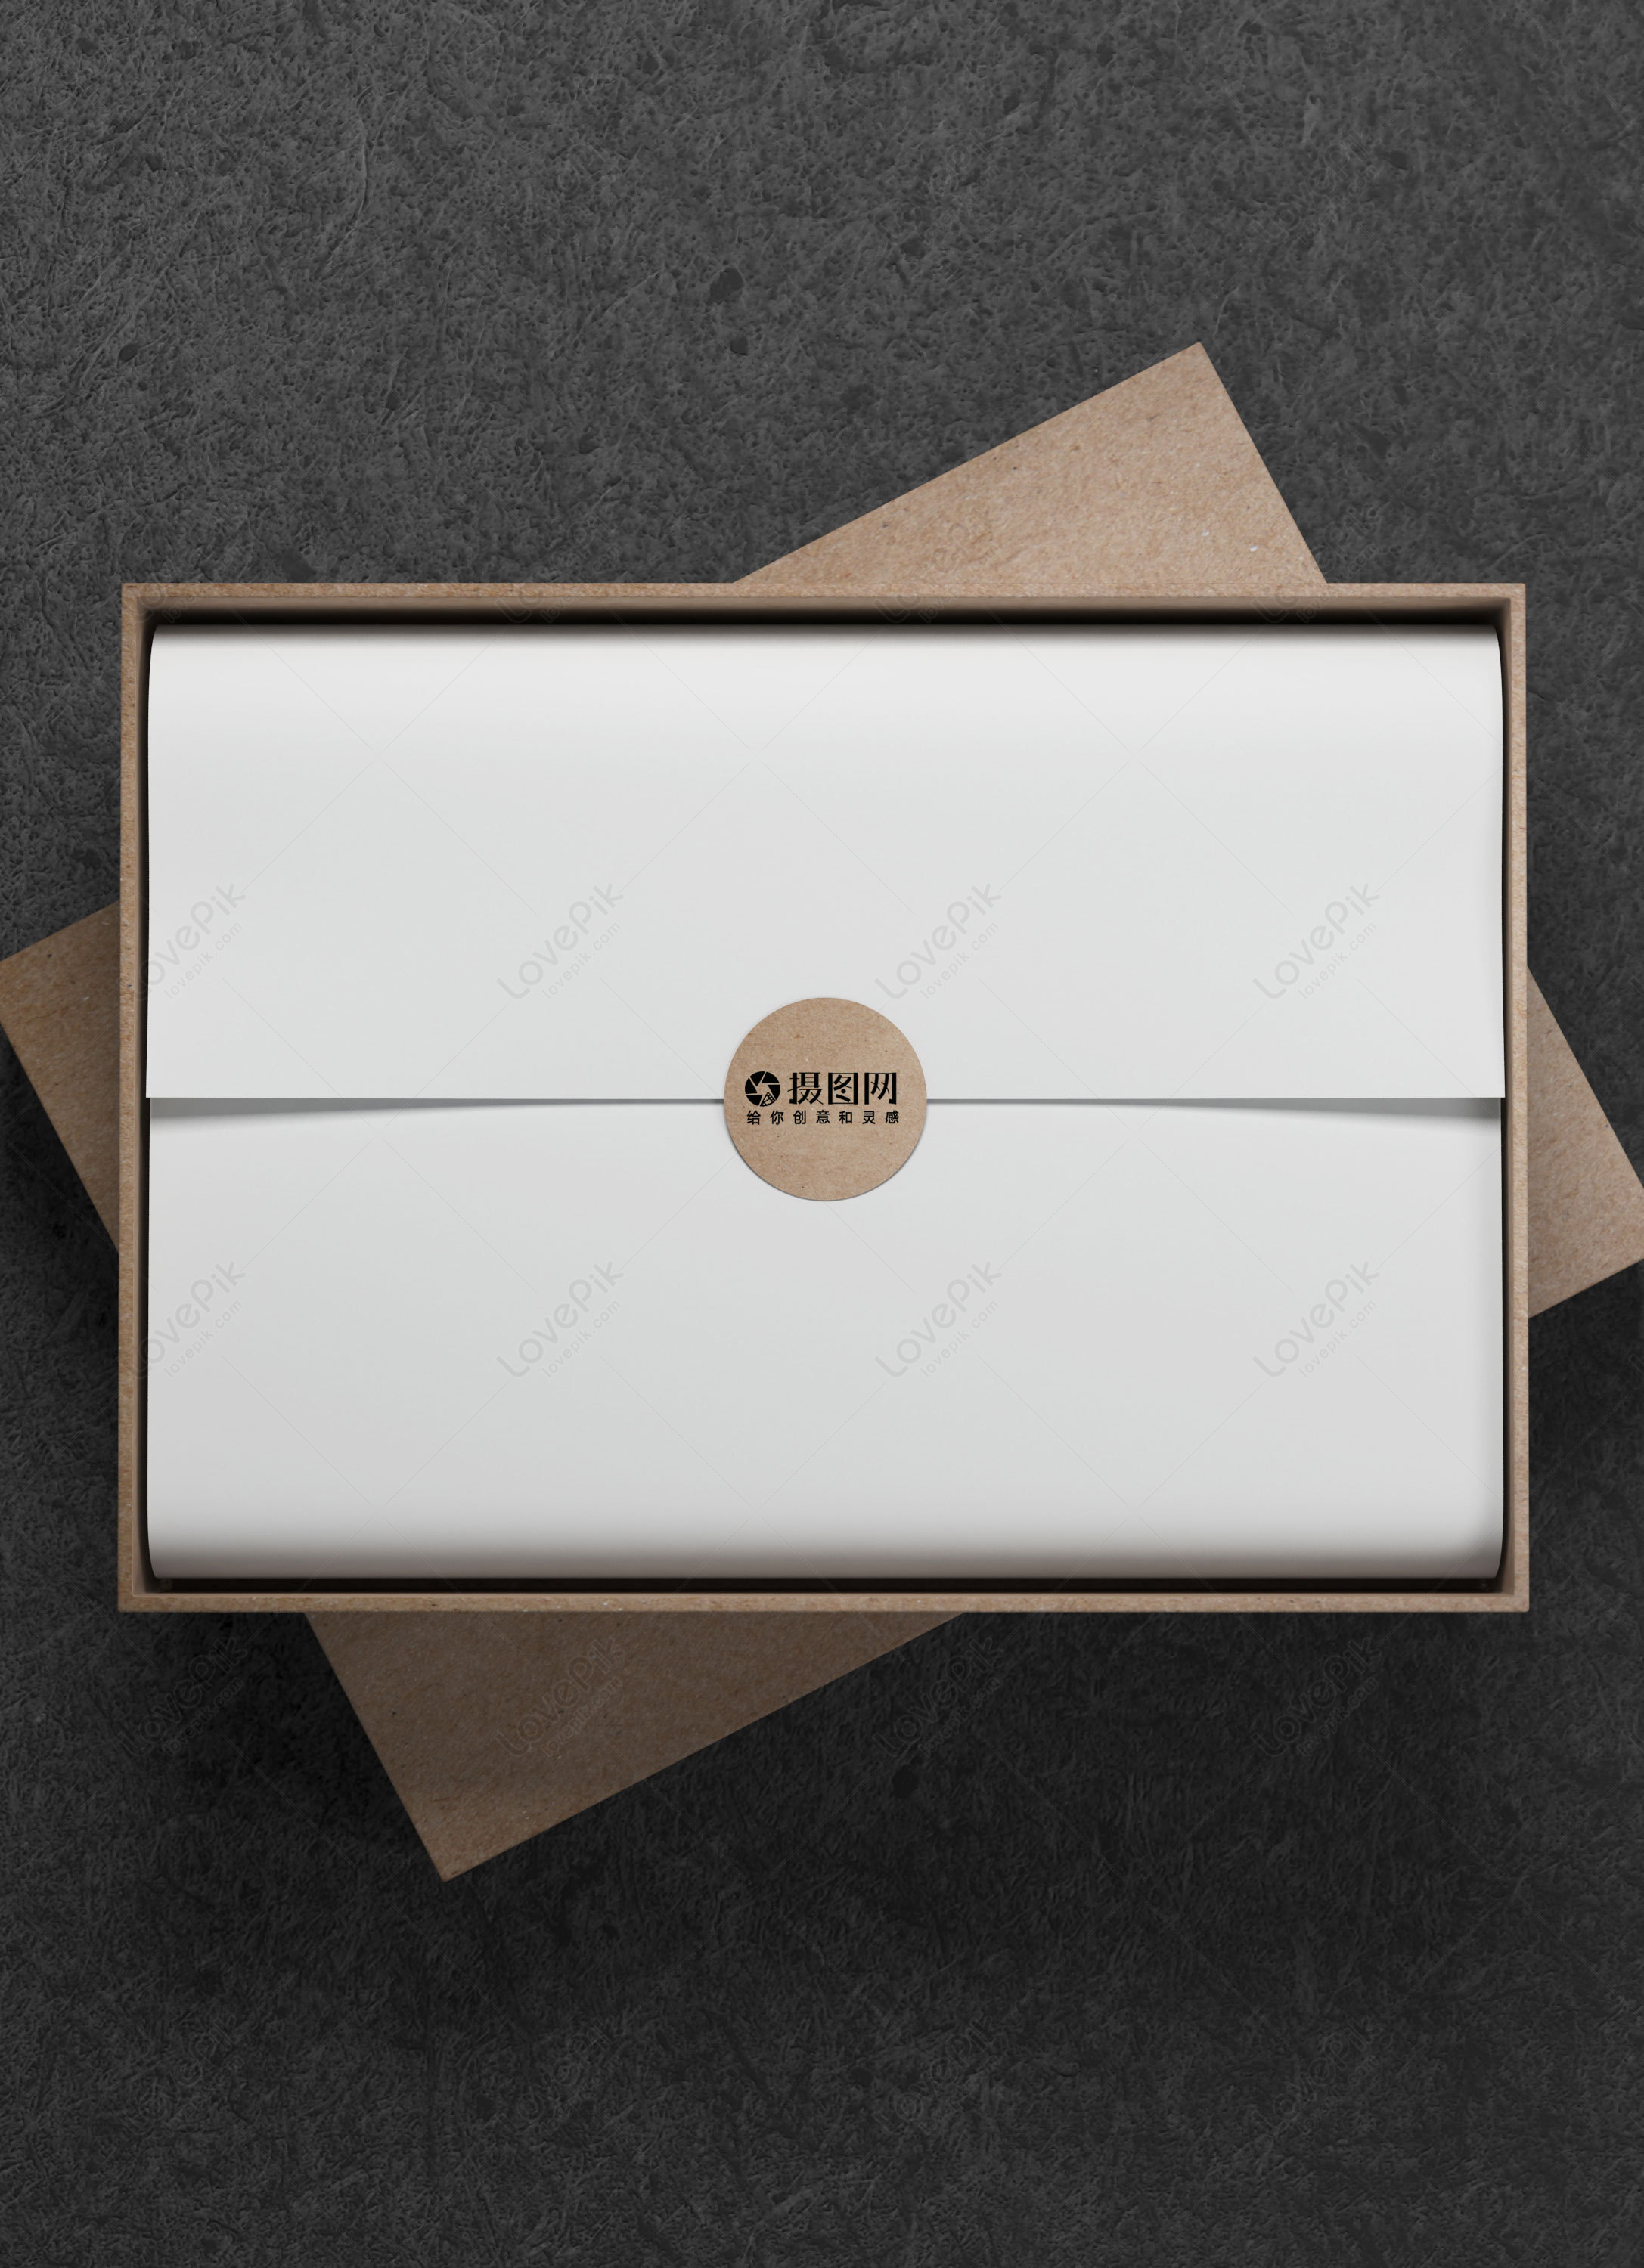 Wooden gift box mockup template image_picture free ...